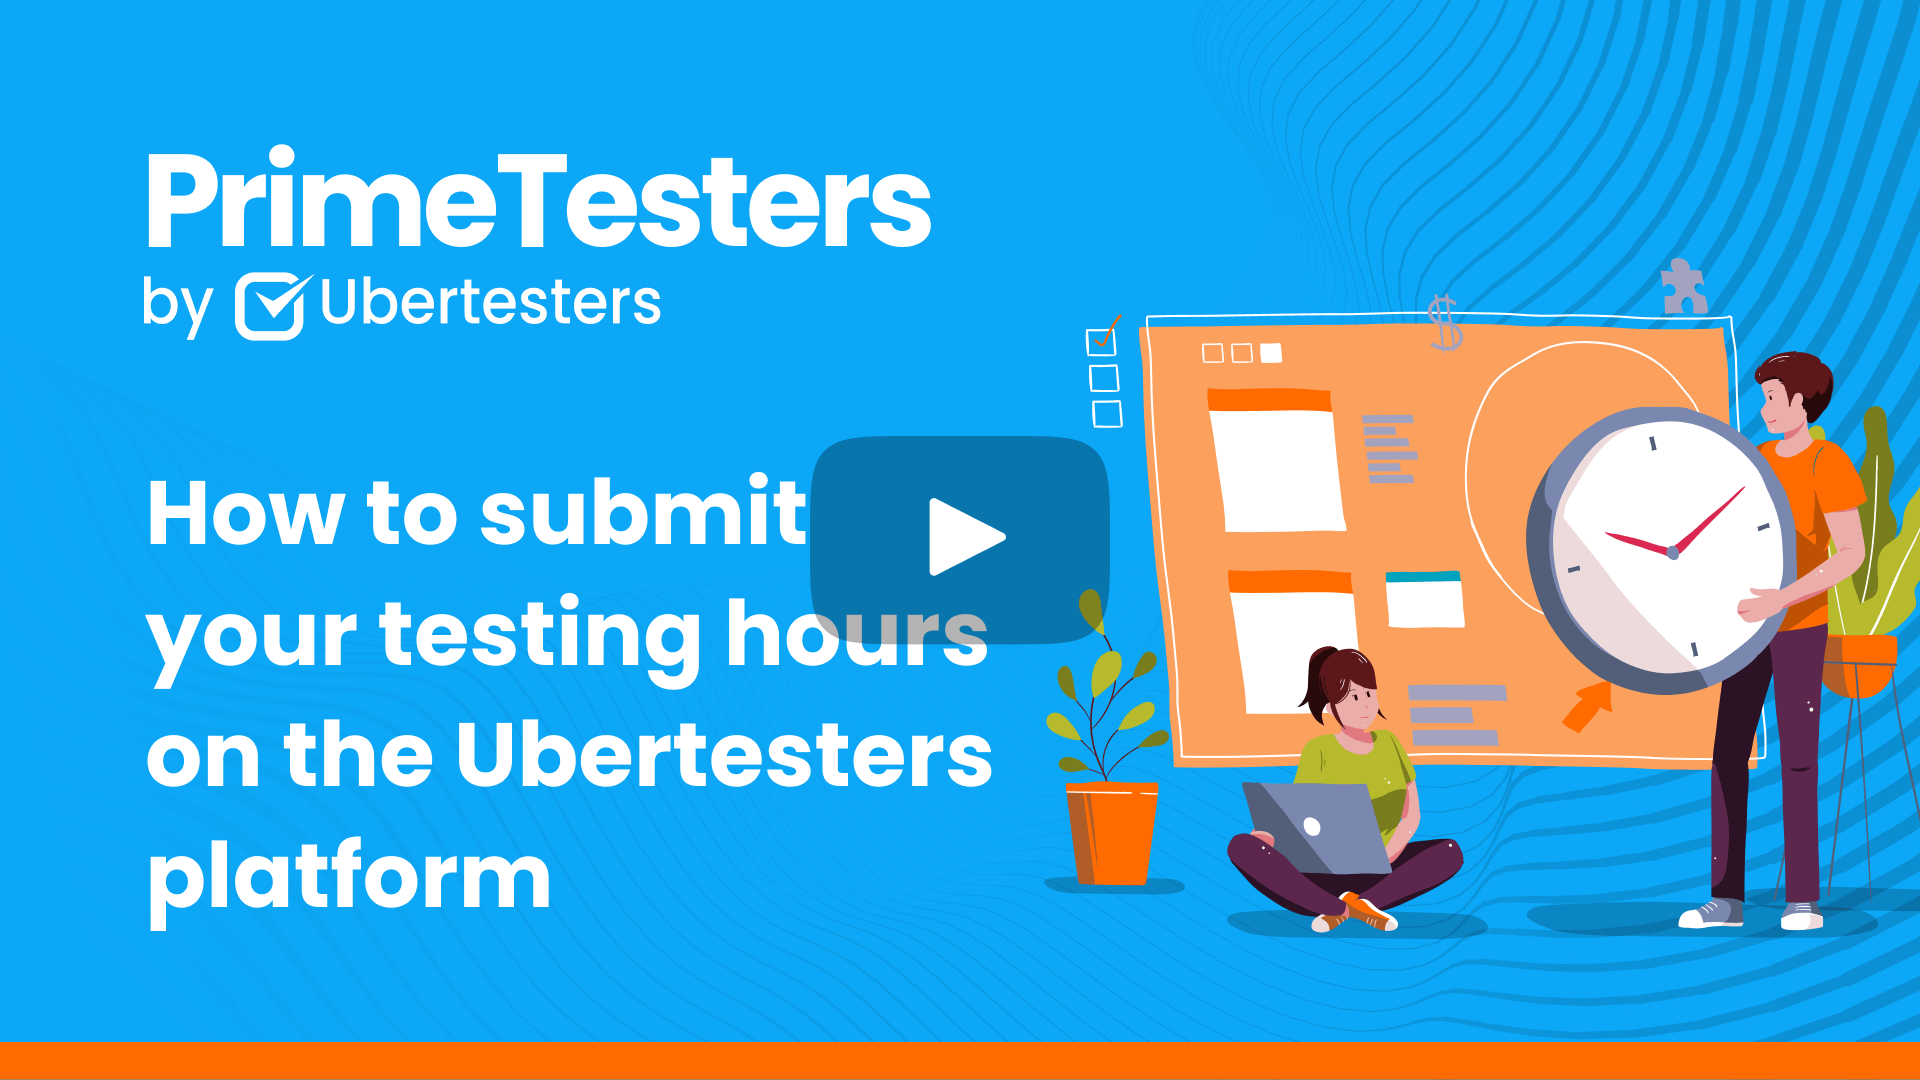 How to submit your testing hours on the Ubertesters platform